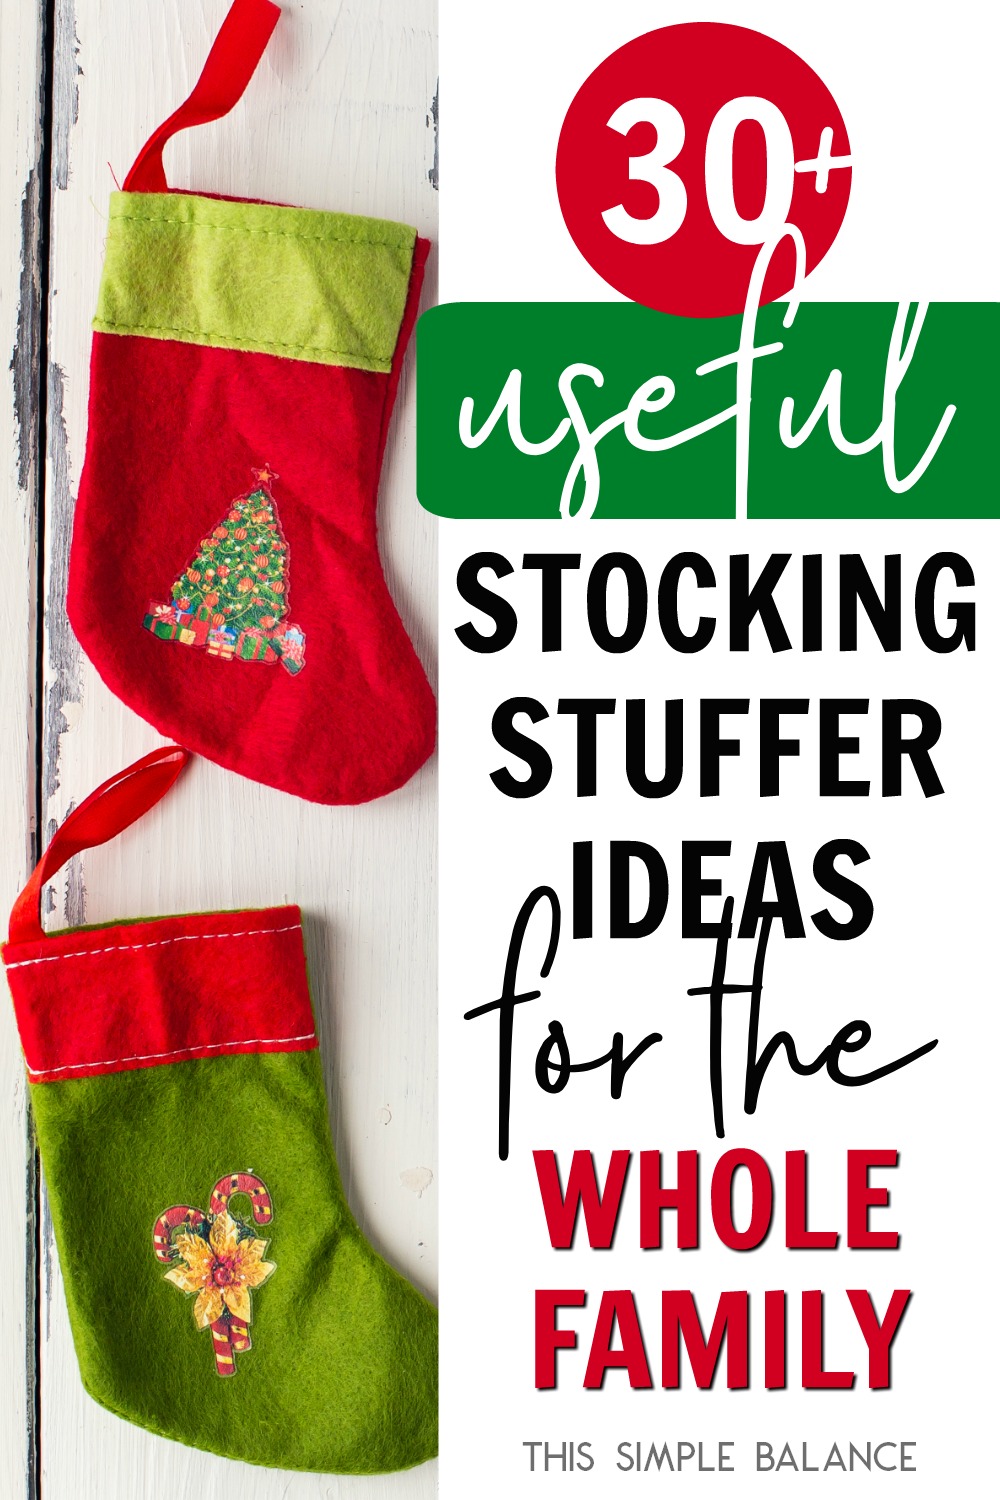 red and green minimalist Christmas stockings with text overlay, "30 useful stocking stuff ideas for the whole family"